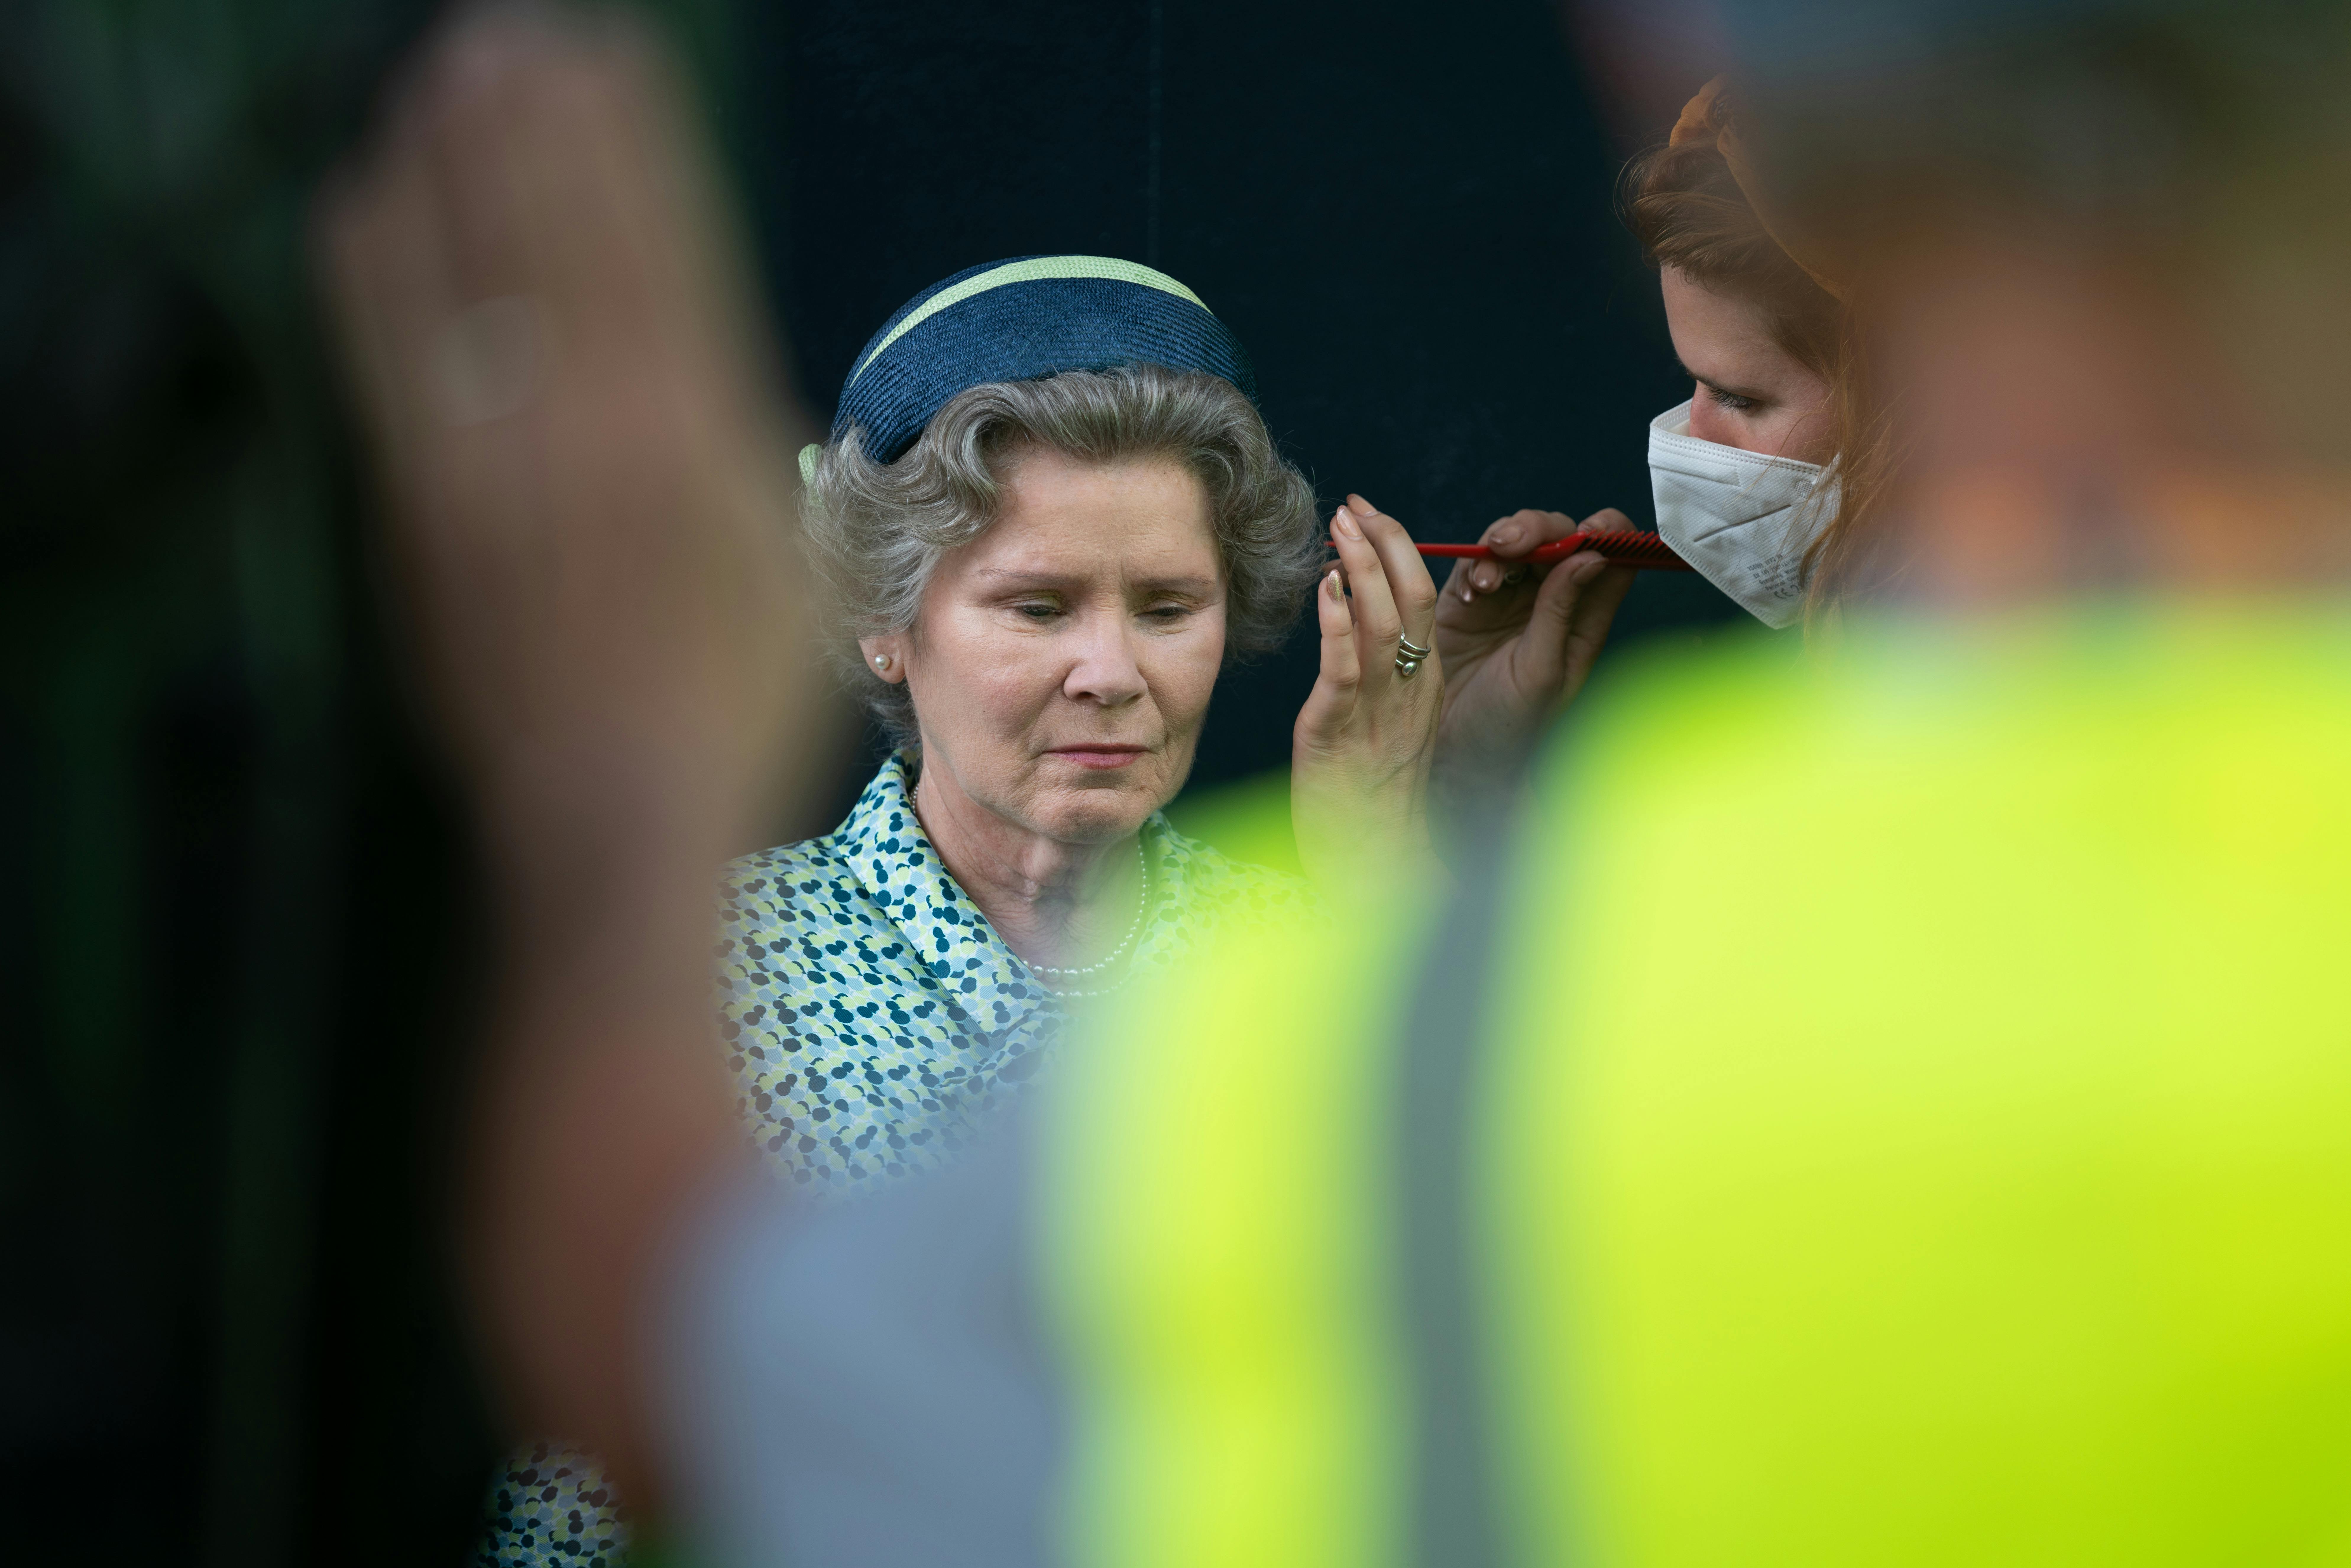 Someone touches up Imelda Staunton's hair in a solemn moment.